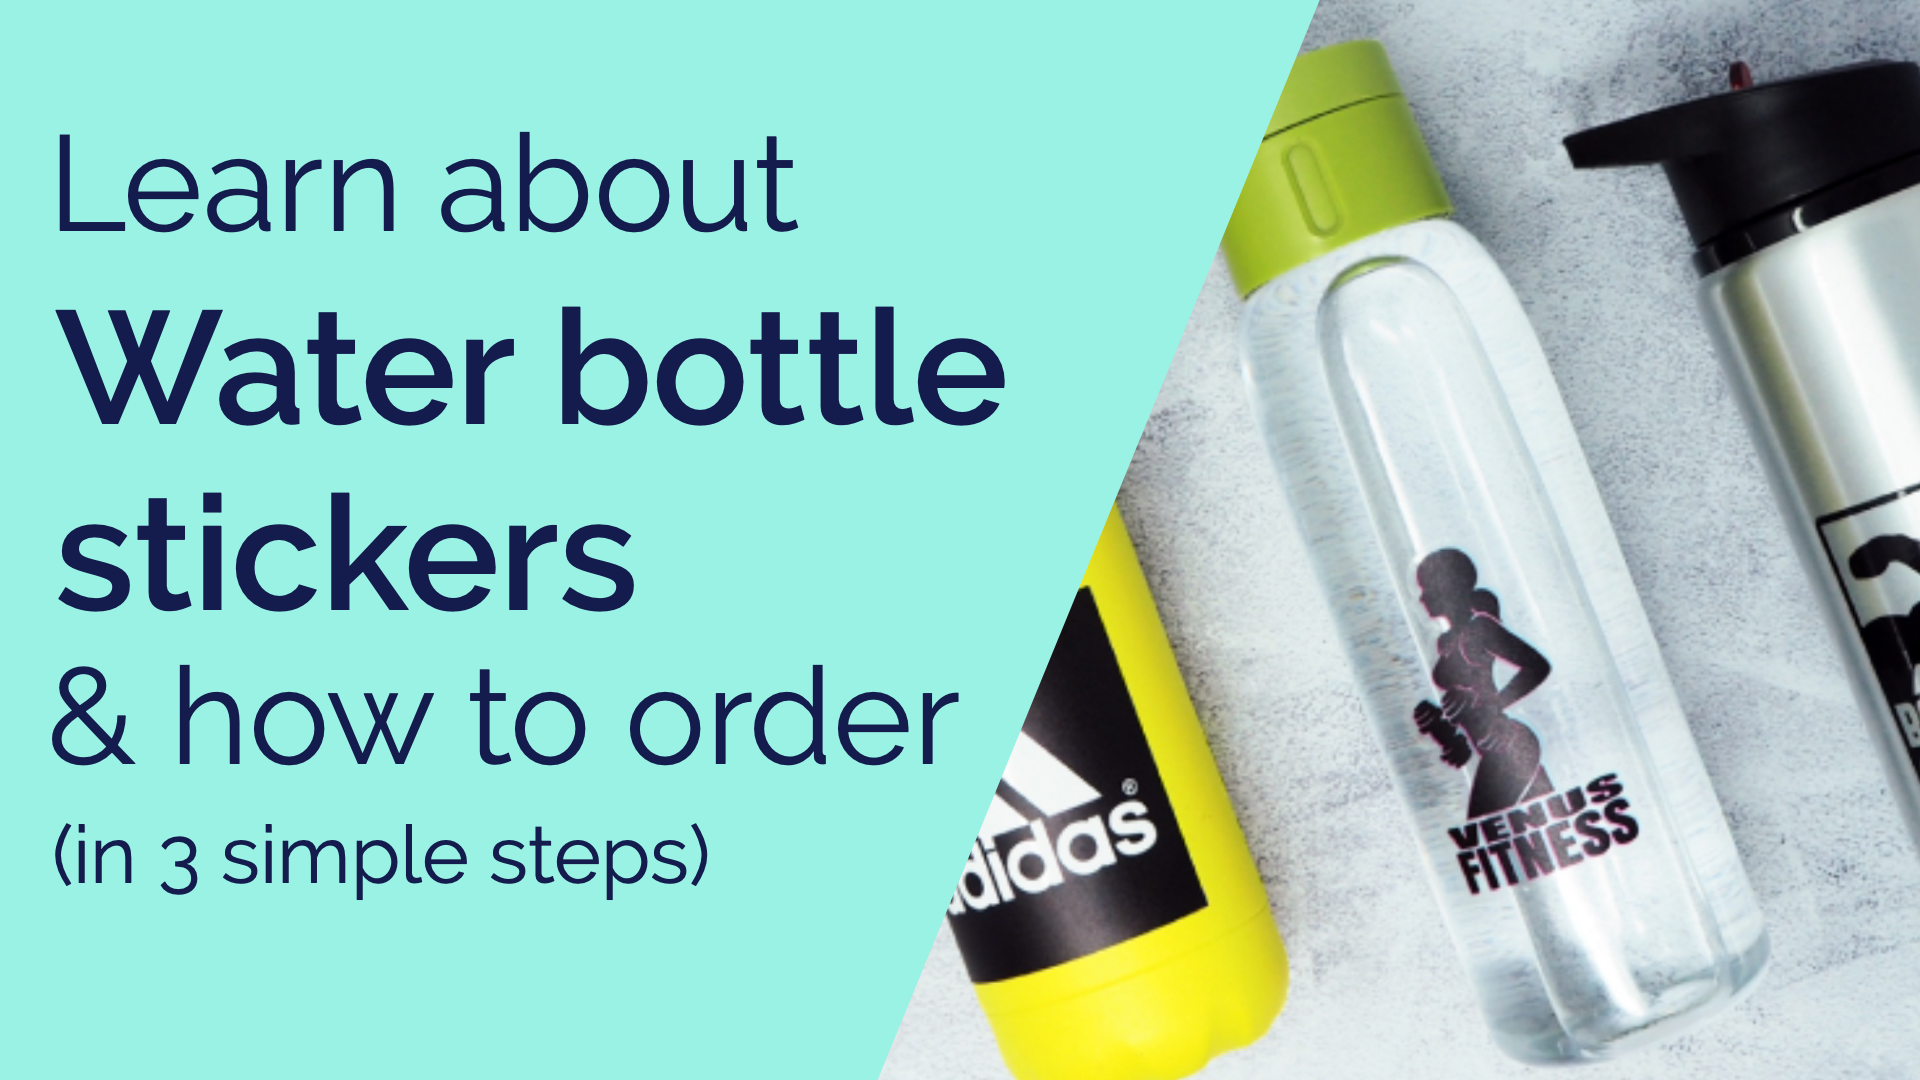 Load video: A video explaining what water bottle stickers are and how to order them